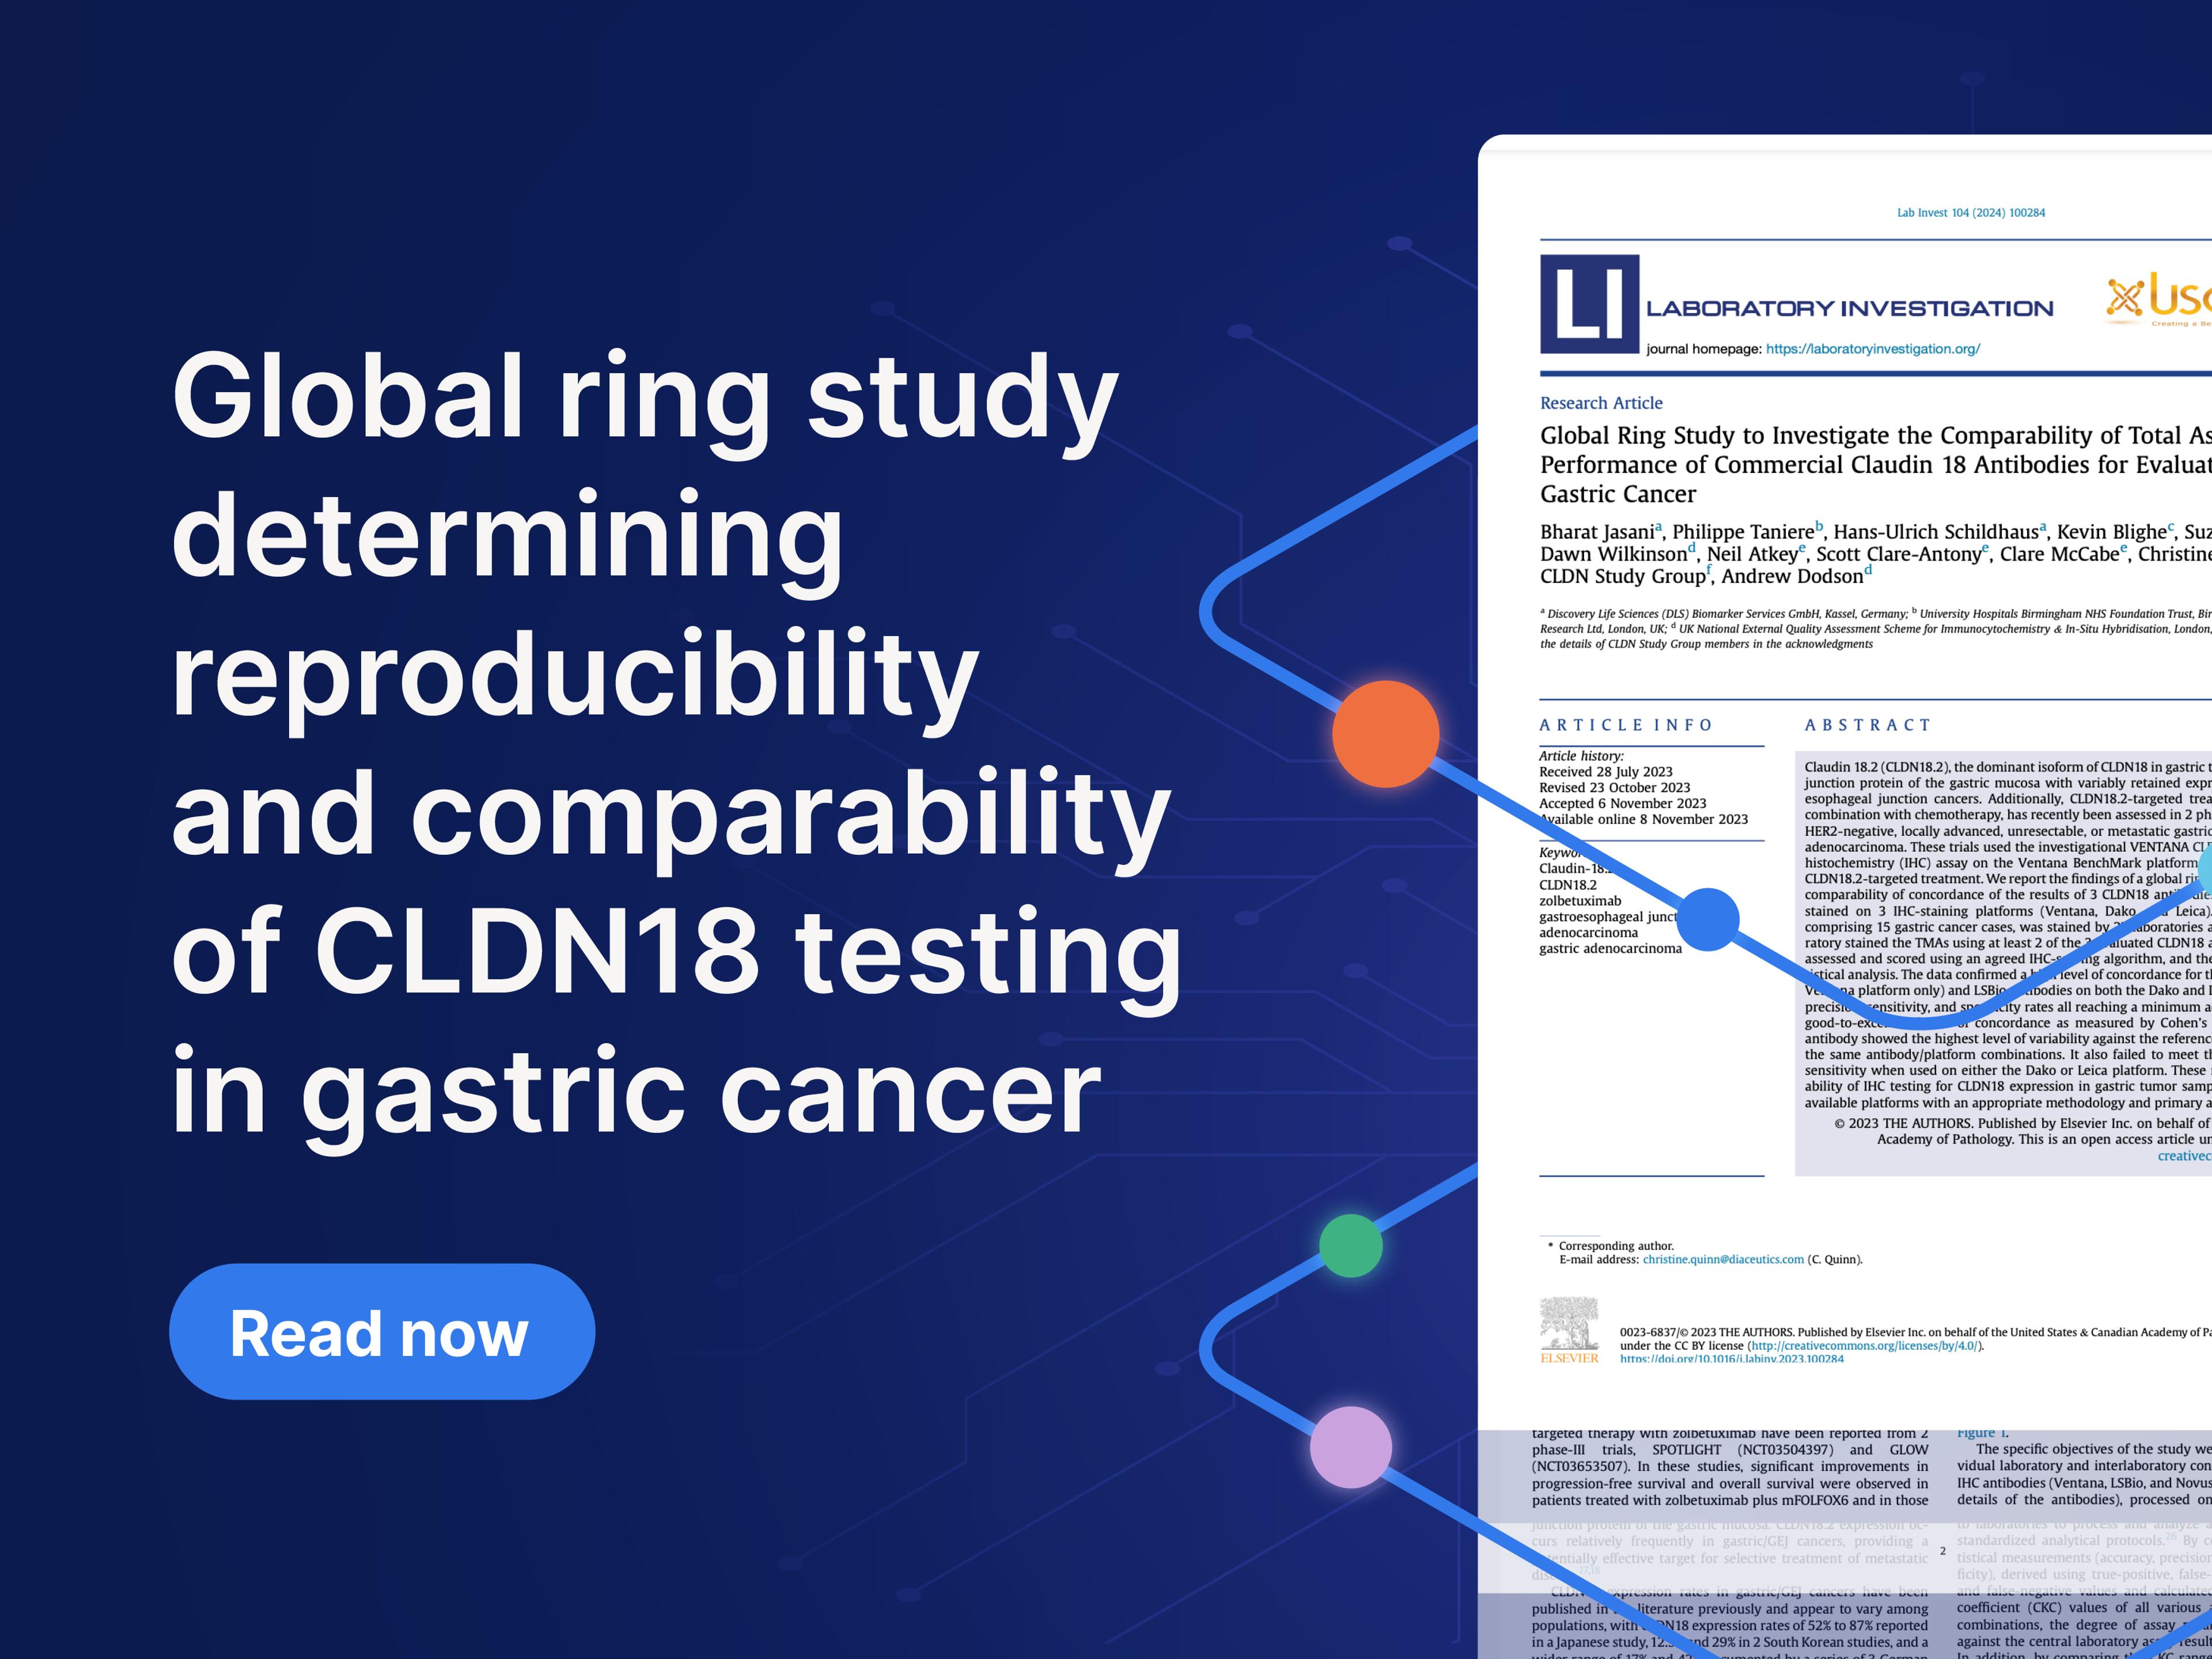 Global Ring Study to Investigate the Comparability of Total Assay Performance of Commercial Claudin 18 Antibodies for Evaluation in Gastric Cancer